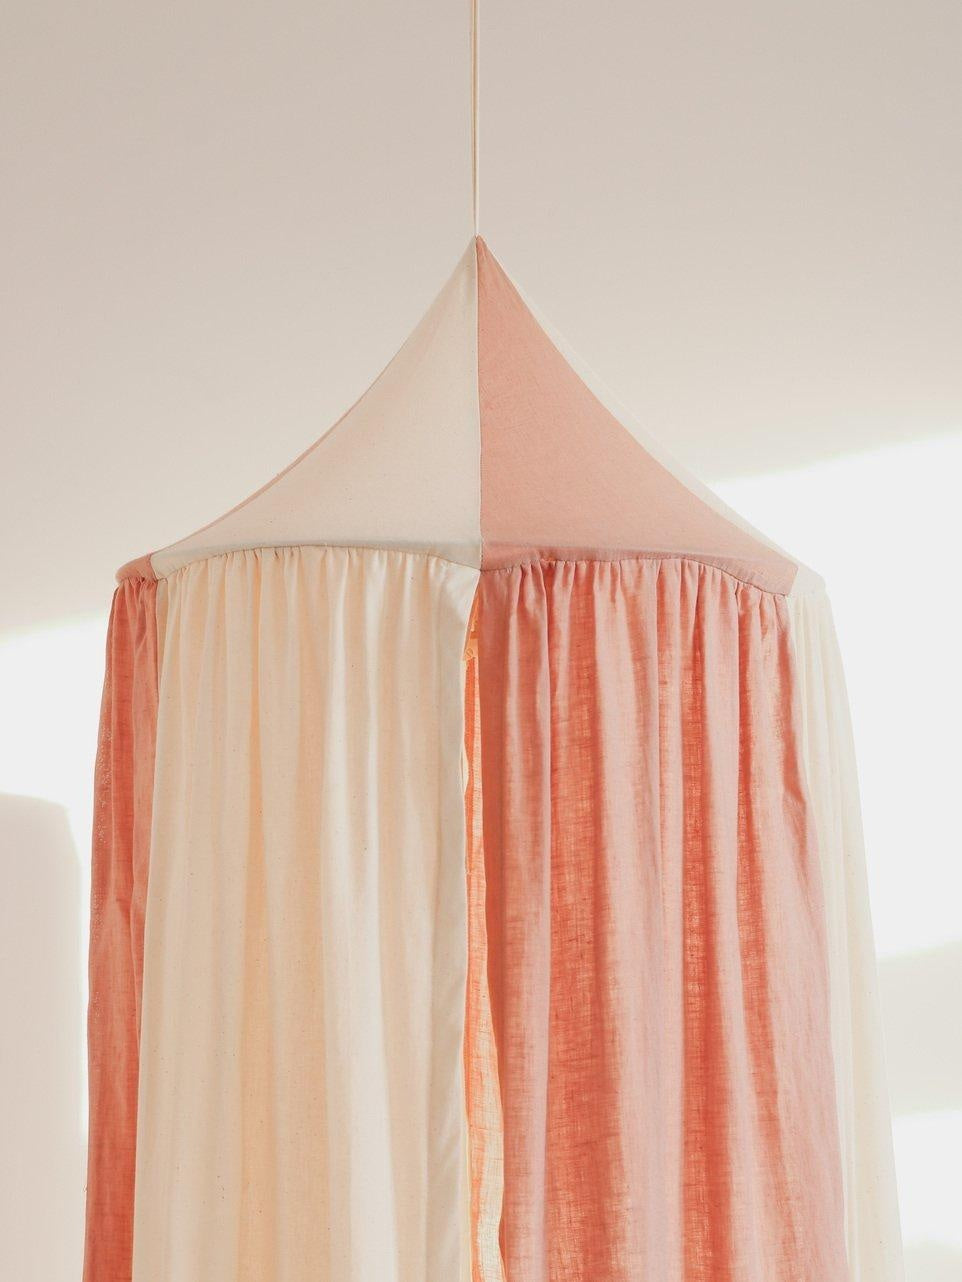 “Powder Pink Circus” Canopy by Moi Mili